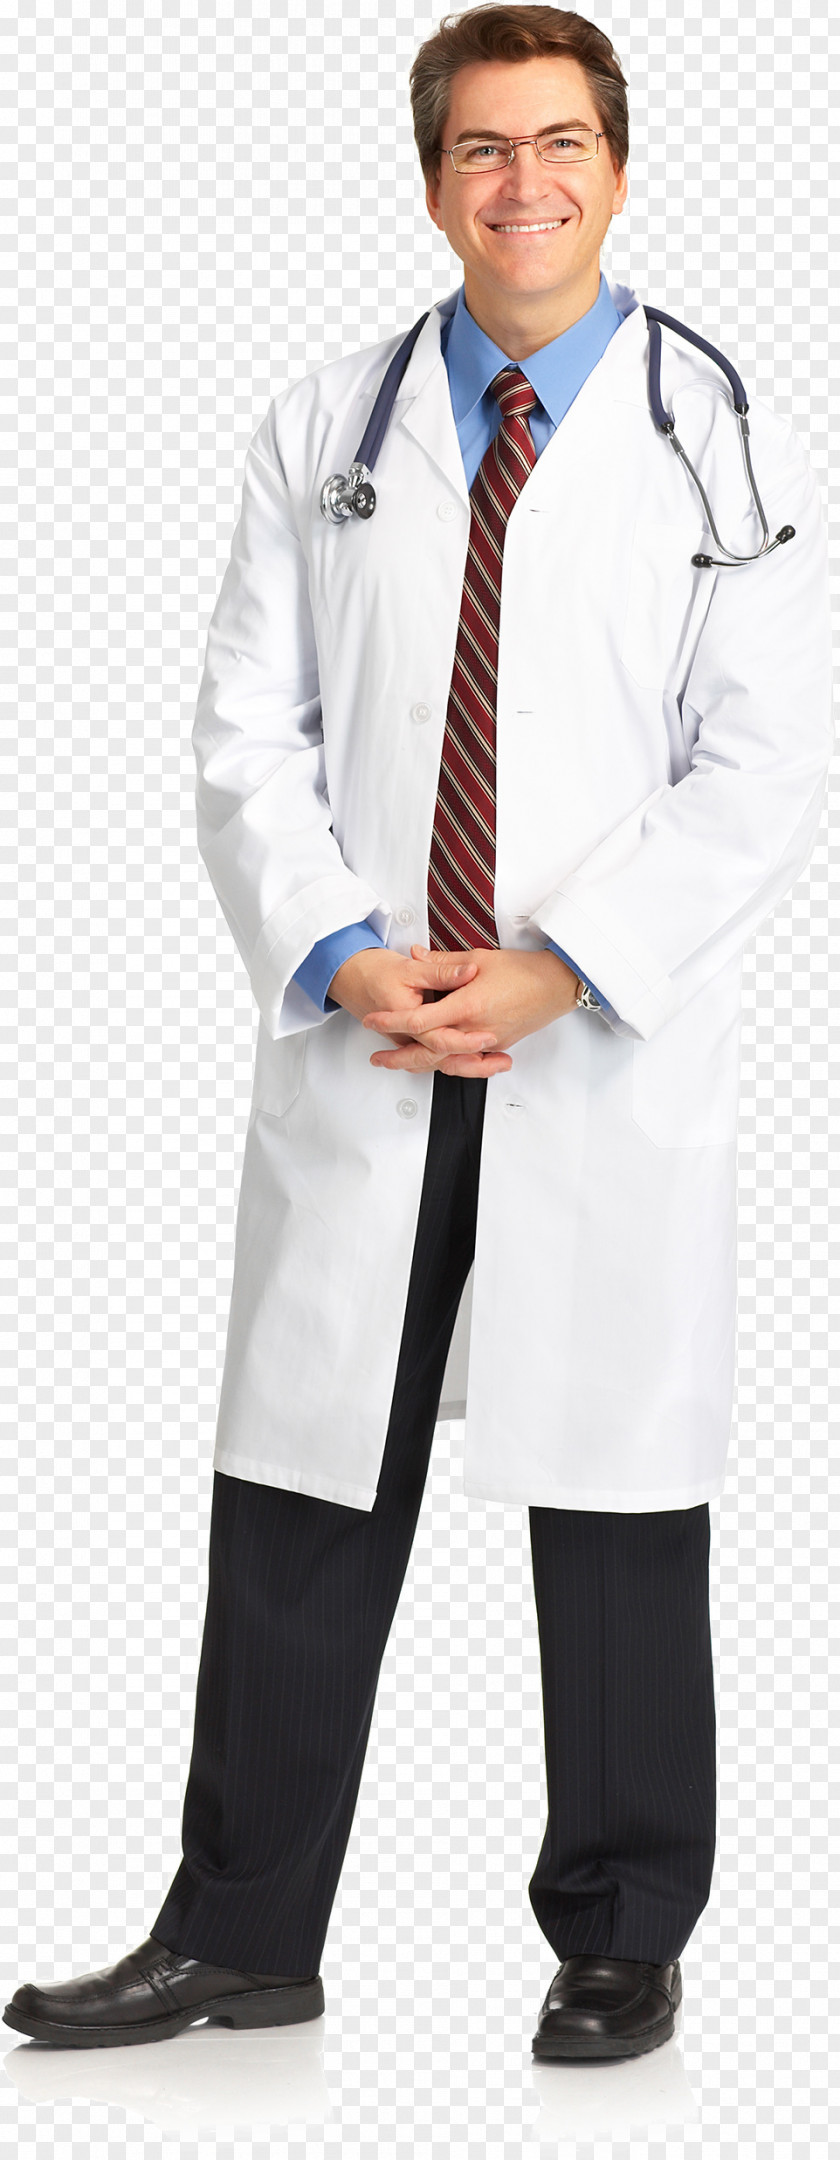 Doctor Physician Medicine Health Care Clinic Stethoscope PNG